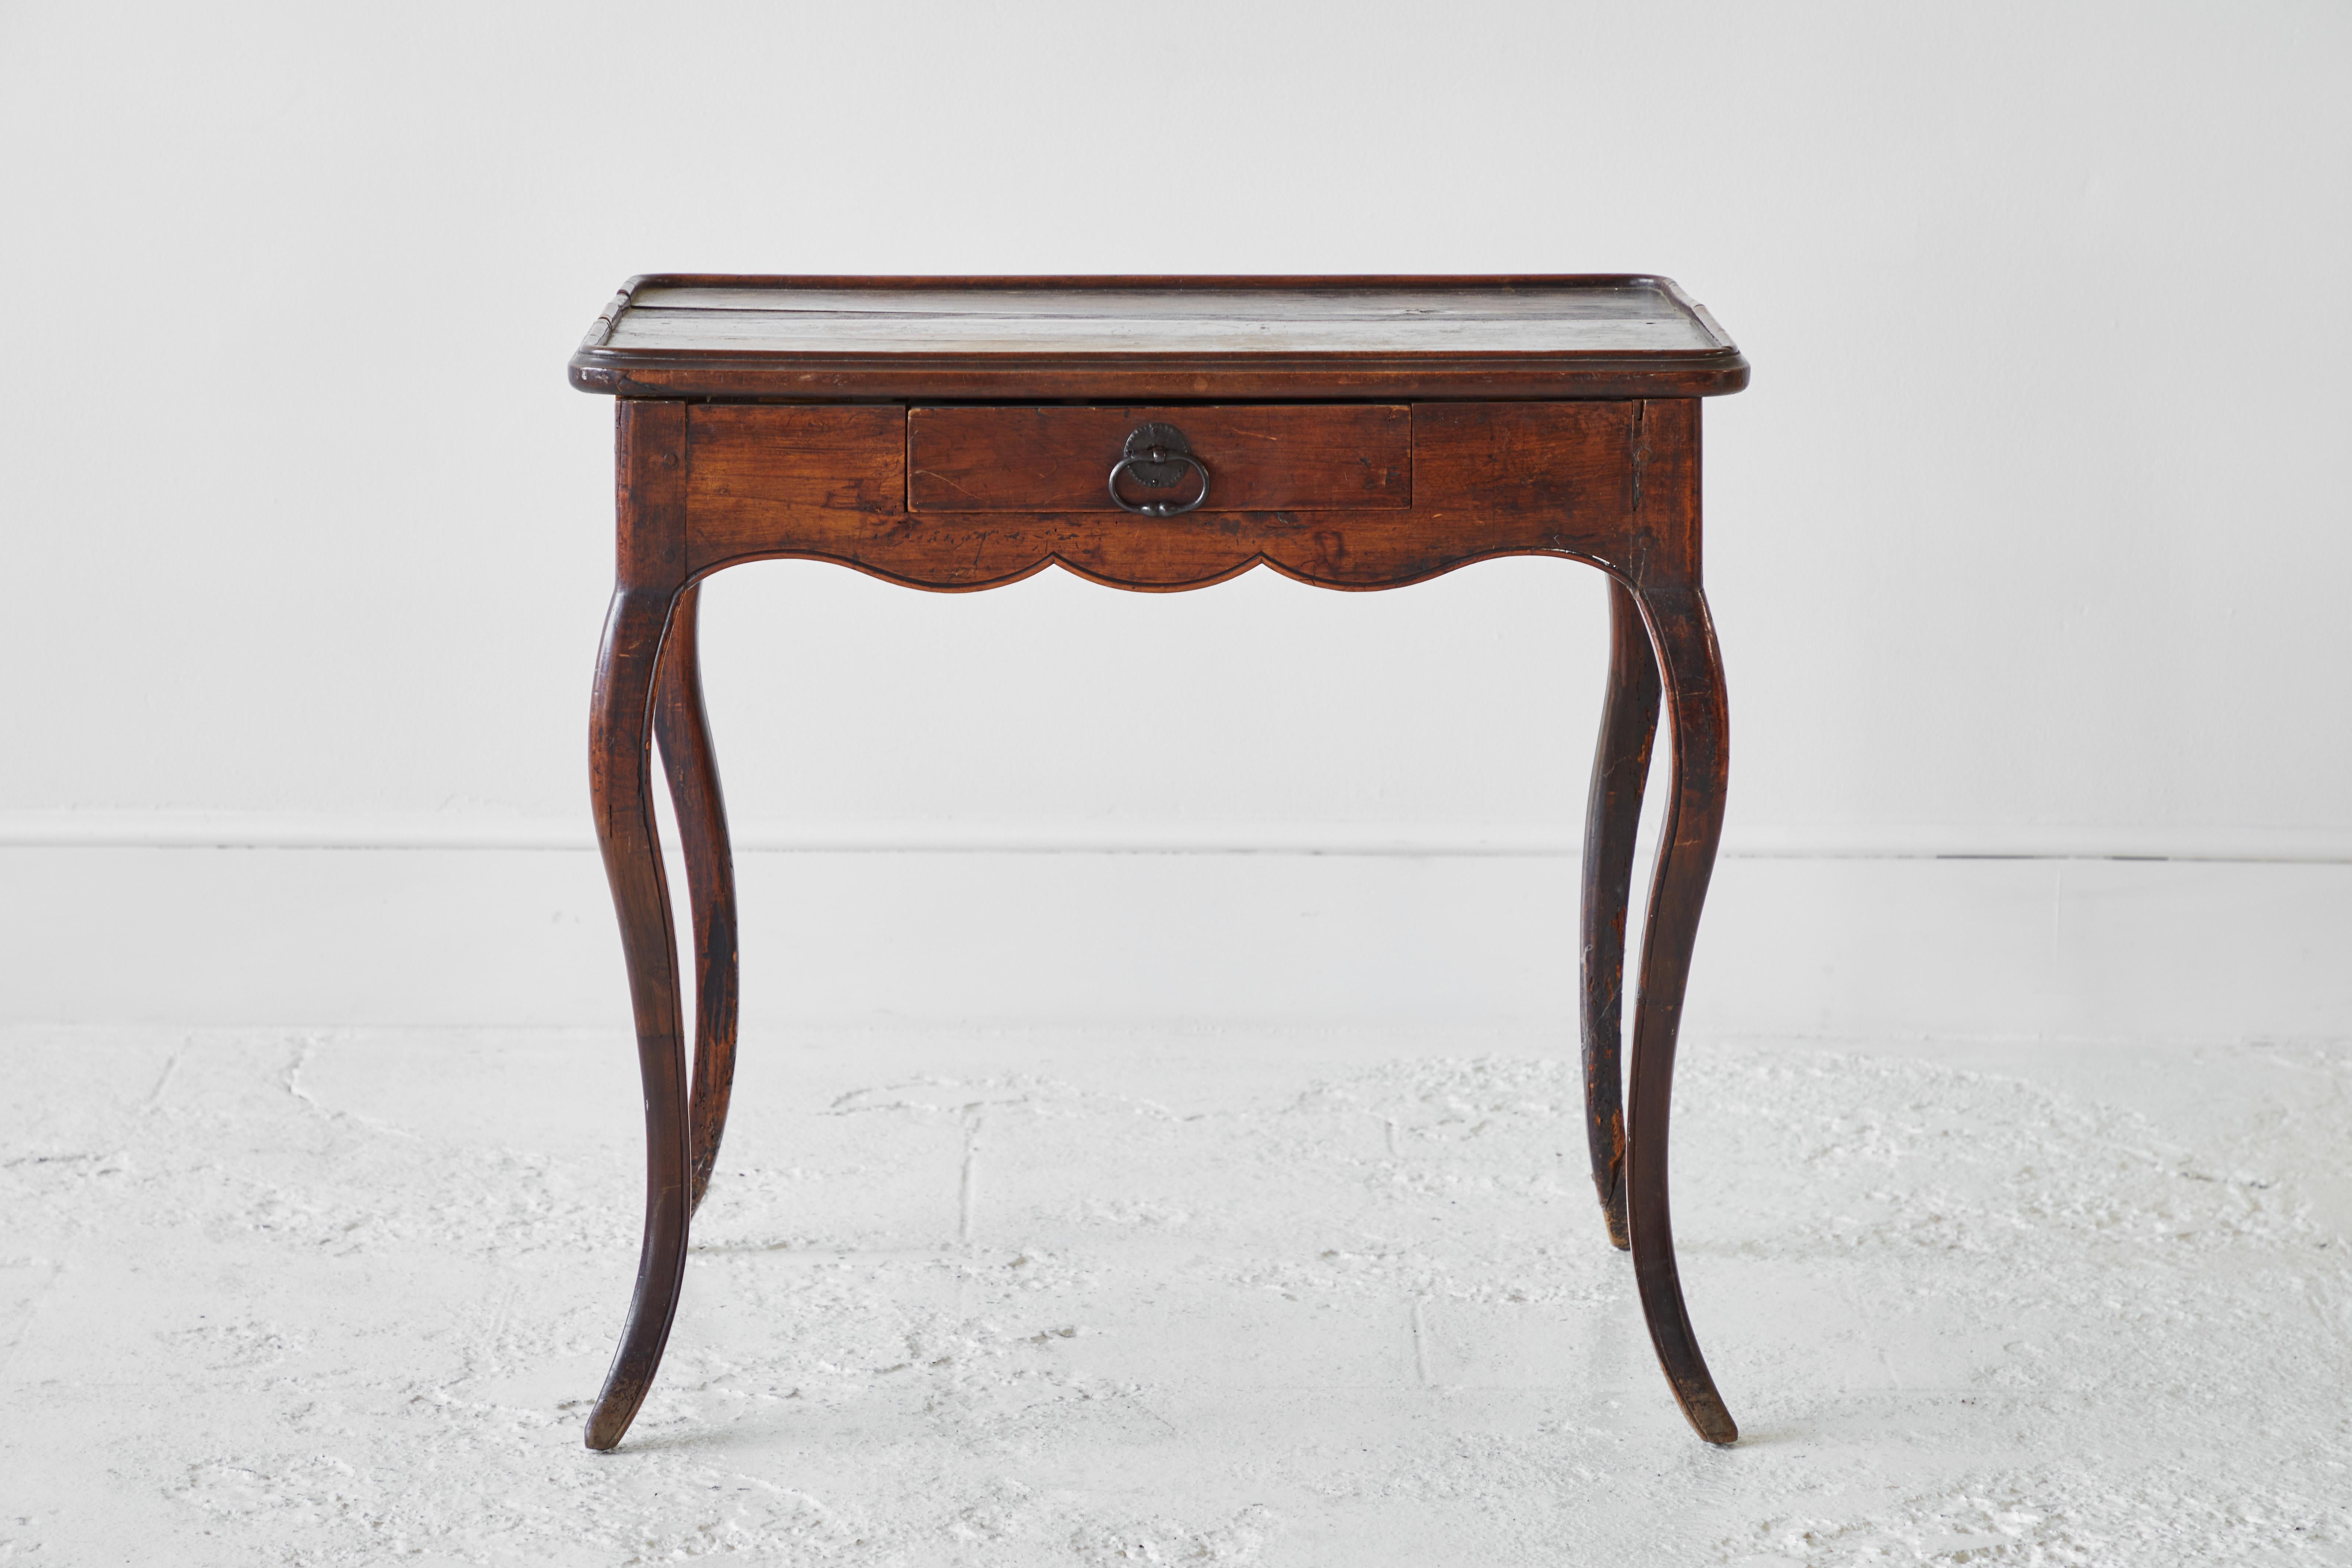 Beautifully elegant Italian scrolled leg side table with scalloped details and a single drawer.